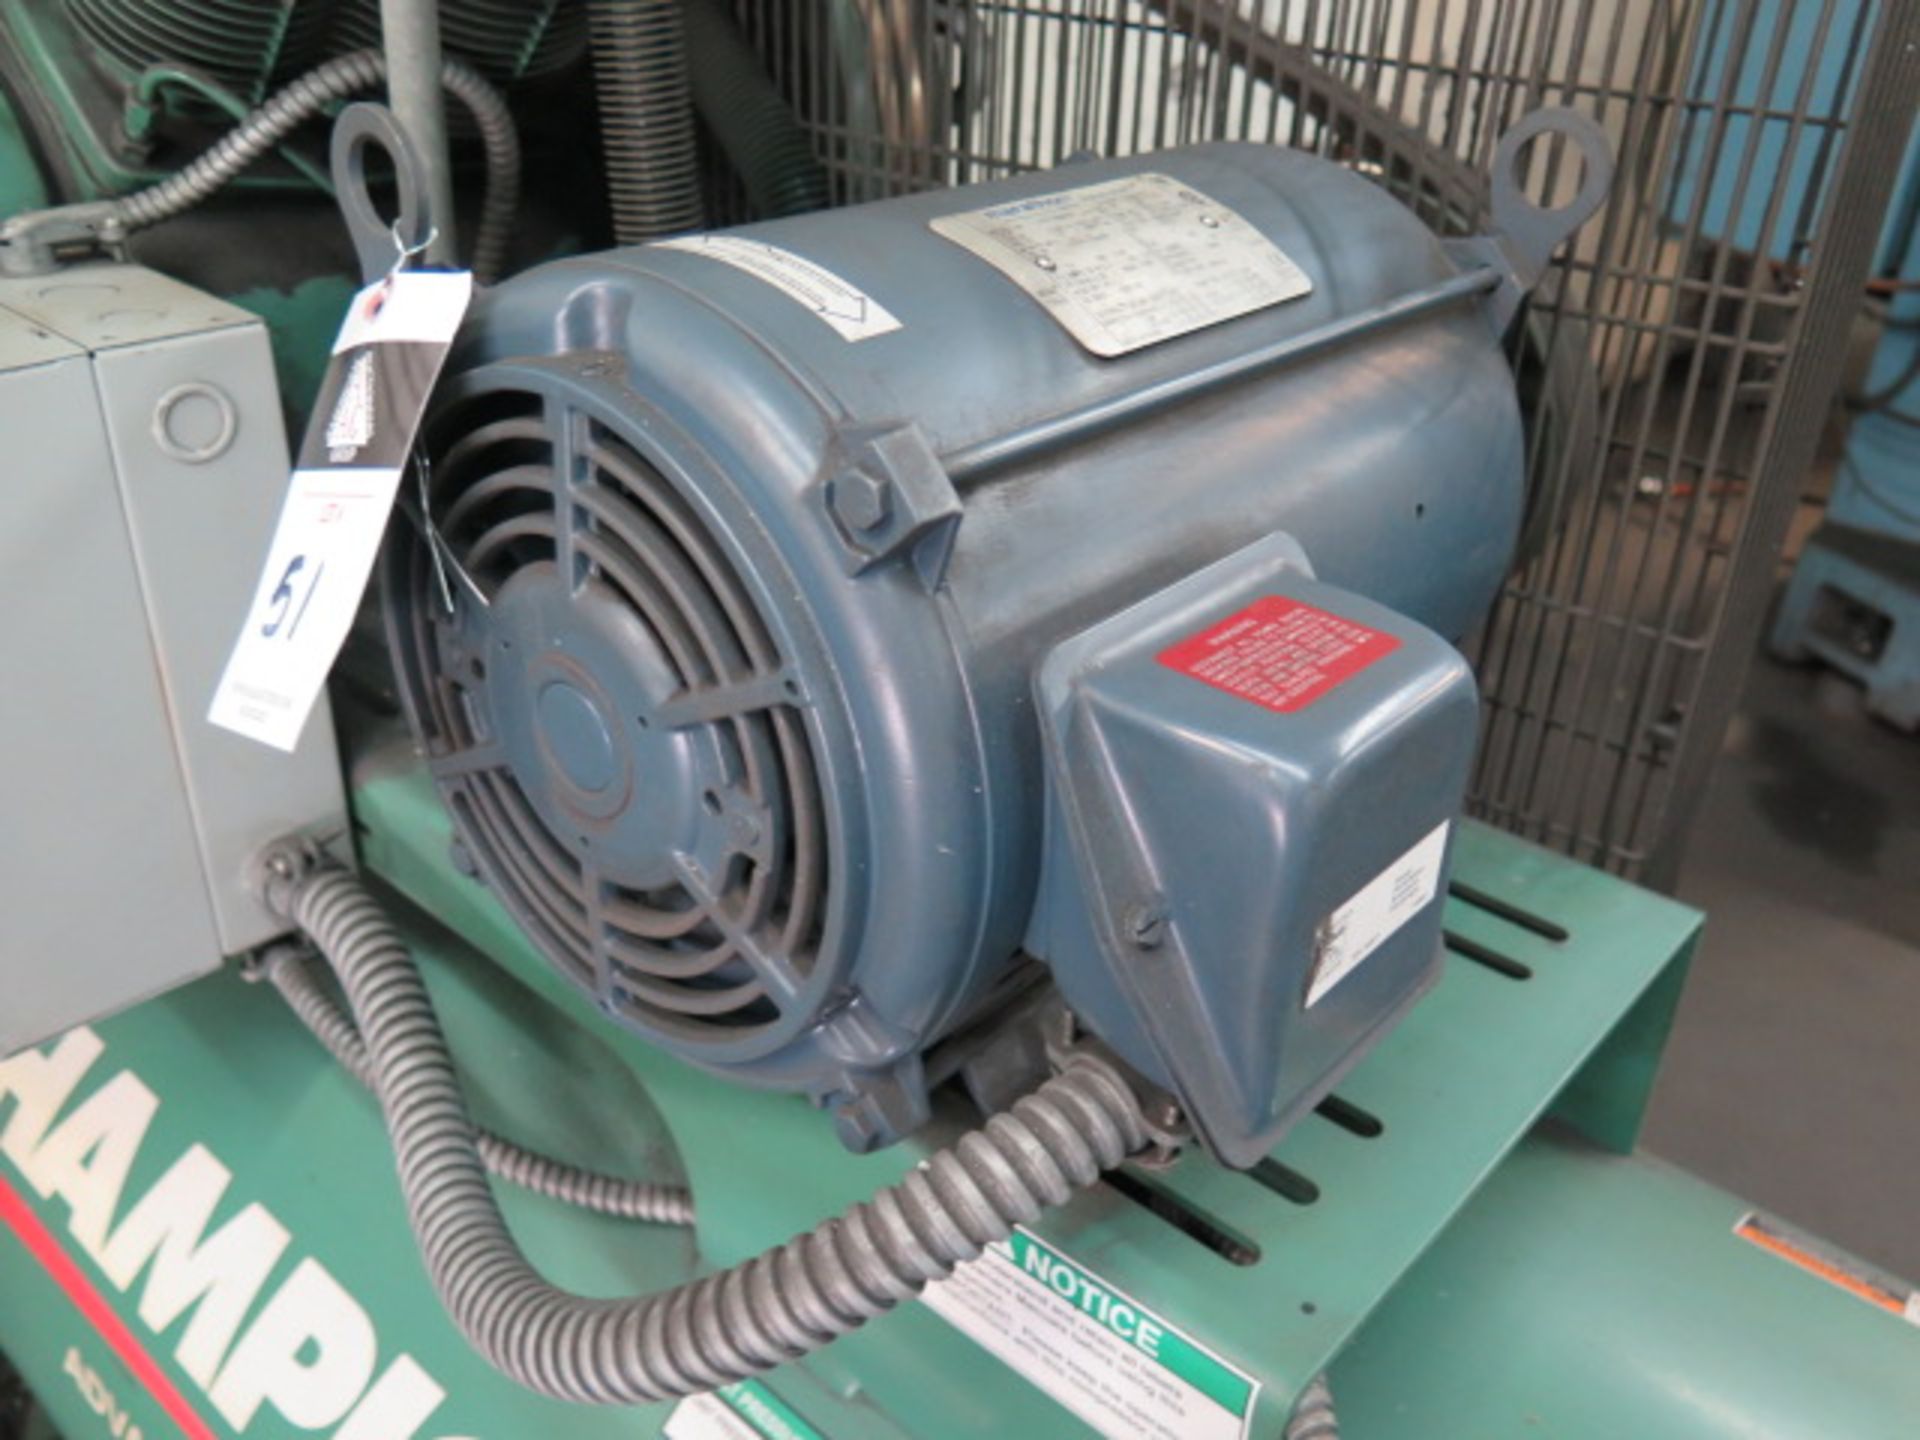 2017 Champion Advantage 7.5Hp Horizontal Air Compressor w/ 2-Stage Pump, 120 Gallon Tank (SOLD AS-IS - Image 7 of 12